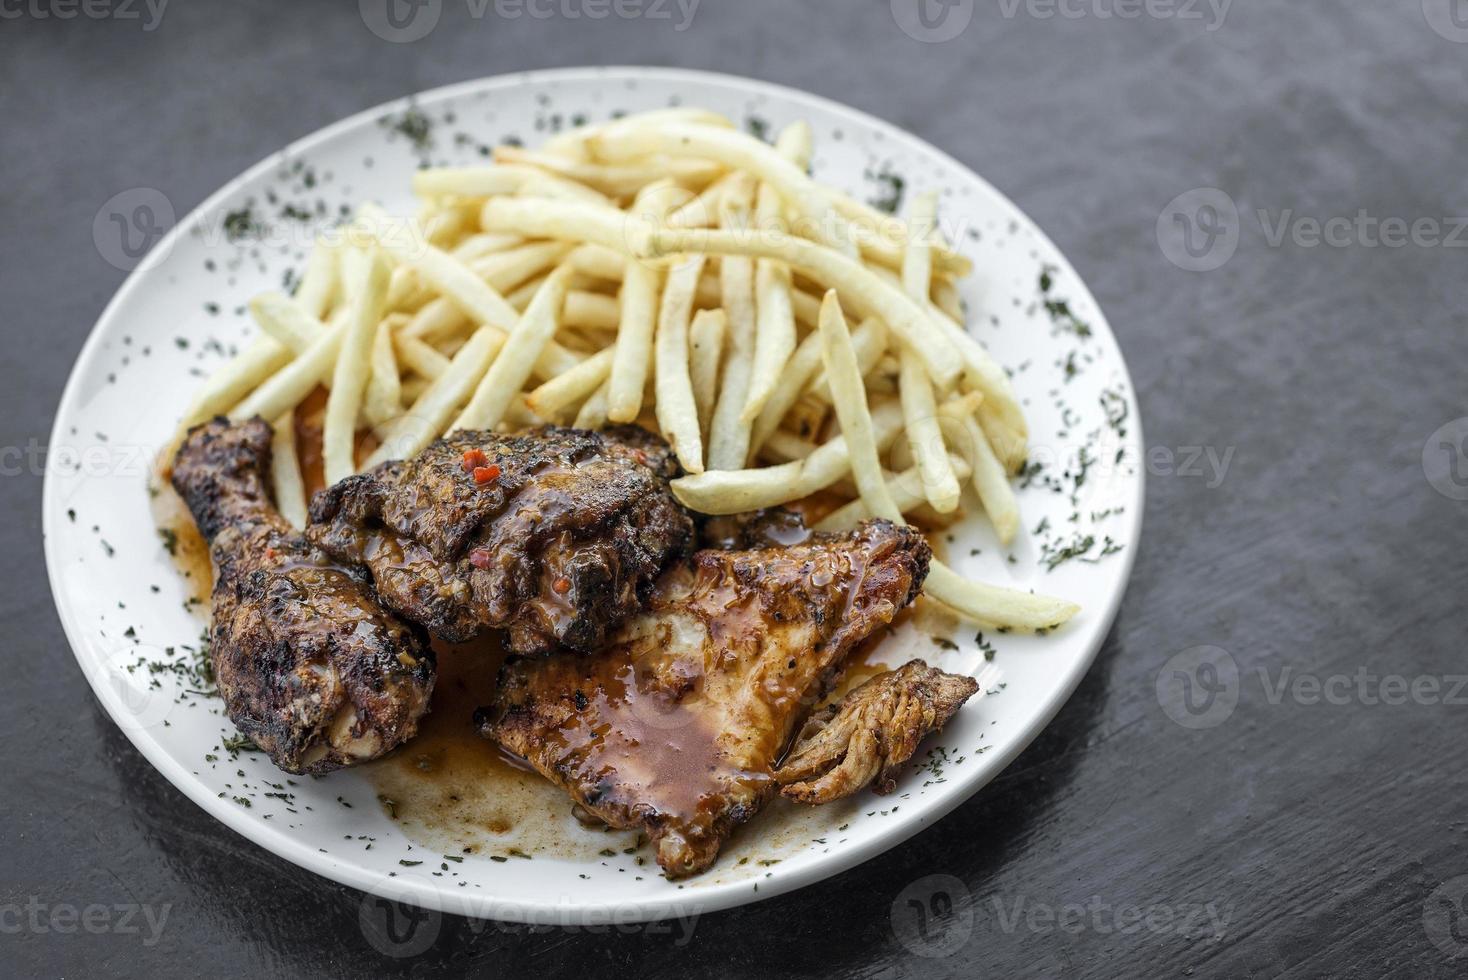 Portuguese famous piri piri spicy bbq chicken with french fries meal photo